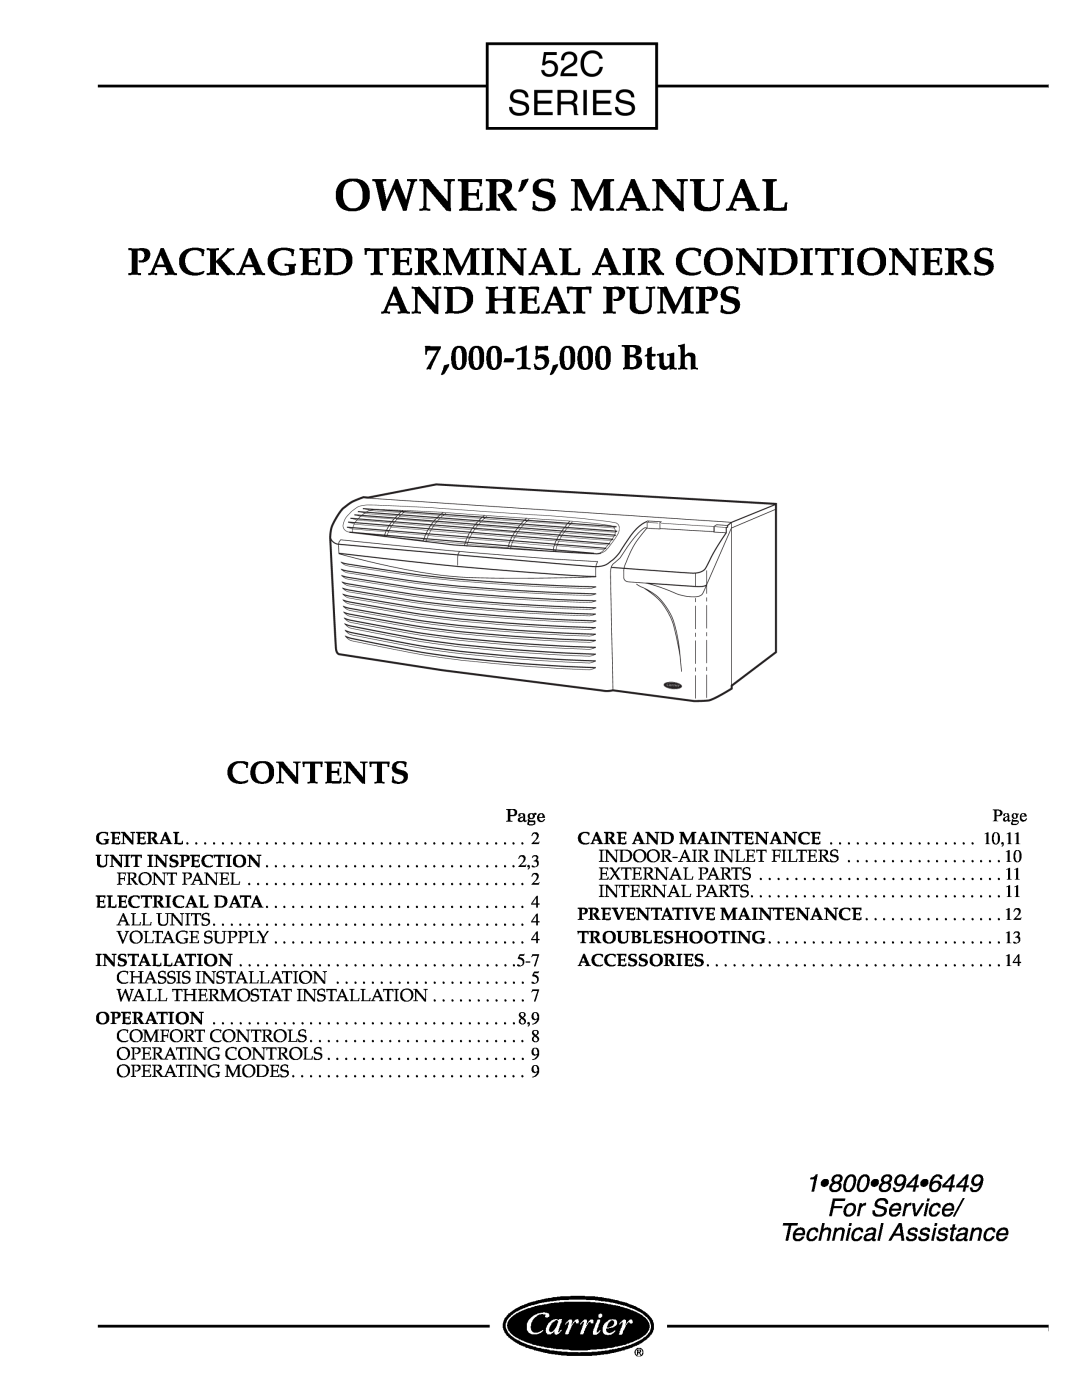 Carrier Access owner manual Contents, Packaged Terminal Air Conditioners And Heat Pumps, 52C SERIES, 7,000-15,000Btuh 